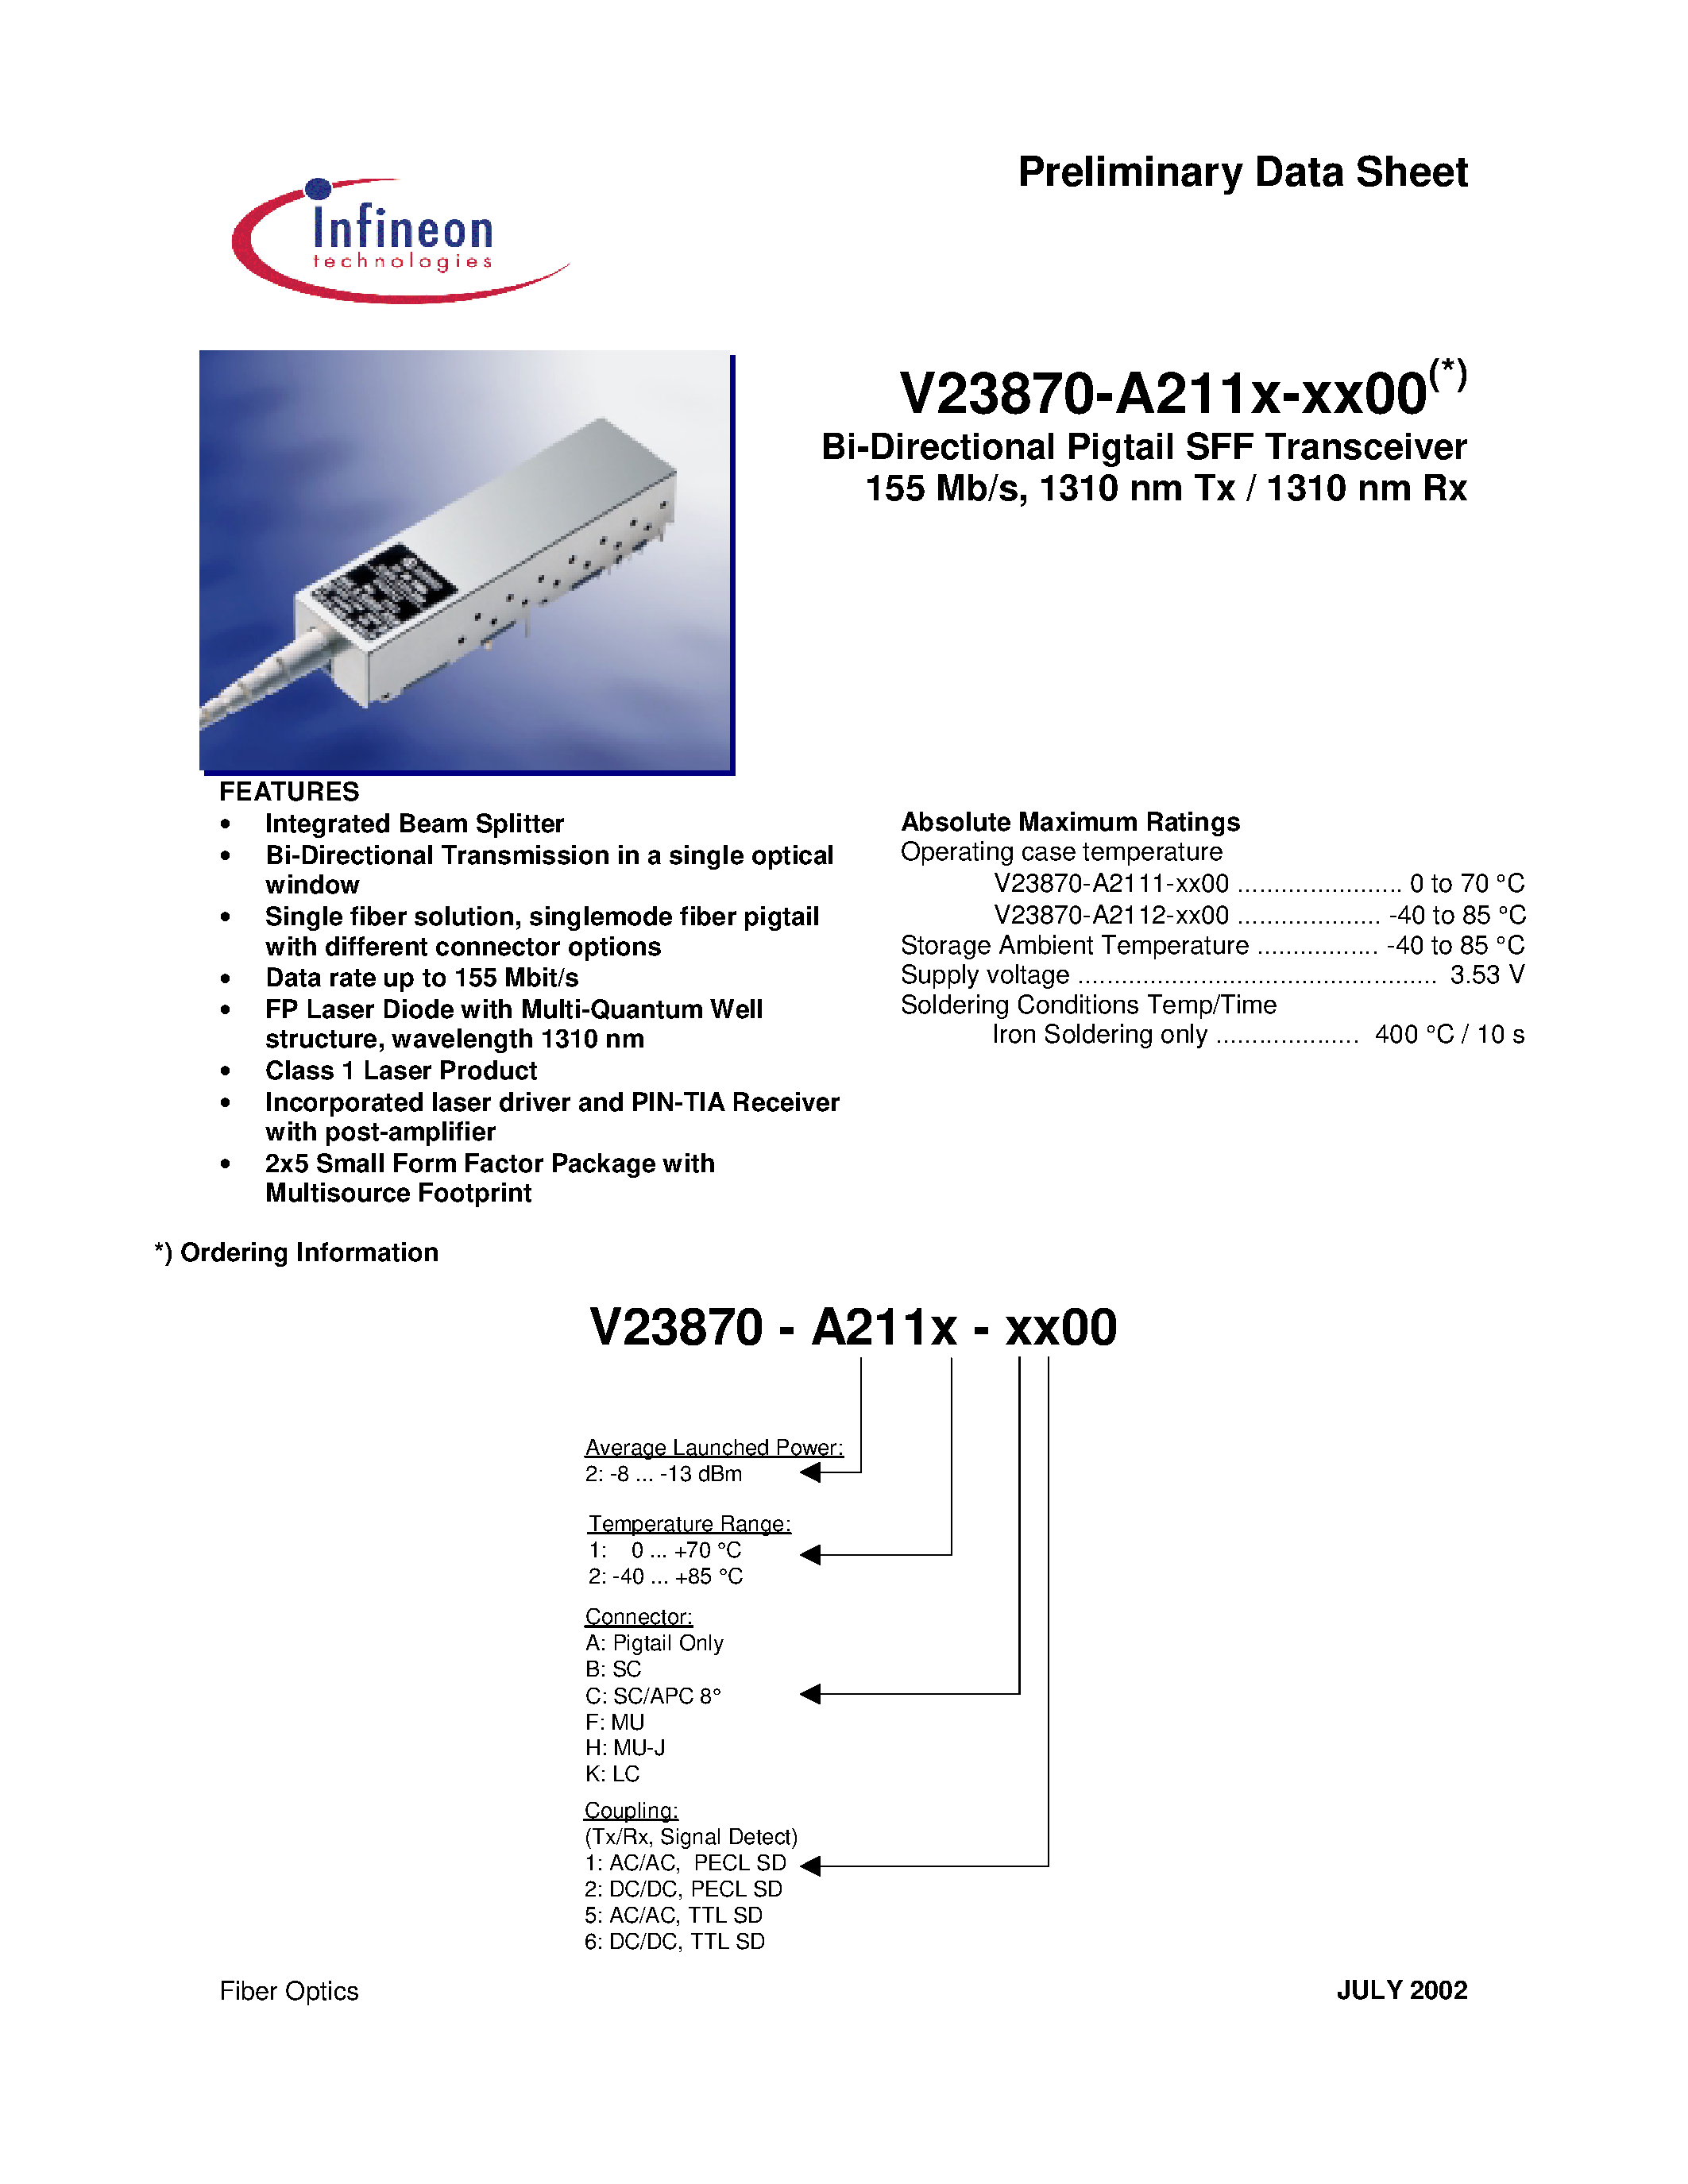 Datasheet V23870-A2111-A100 - Bi-Directional Pigtail SFF Transceiver 155 Mb/s/ 1310 nm Tx / 1310 nm Rx page 1